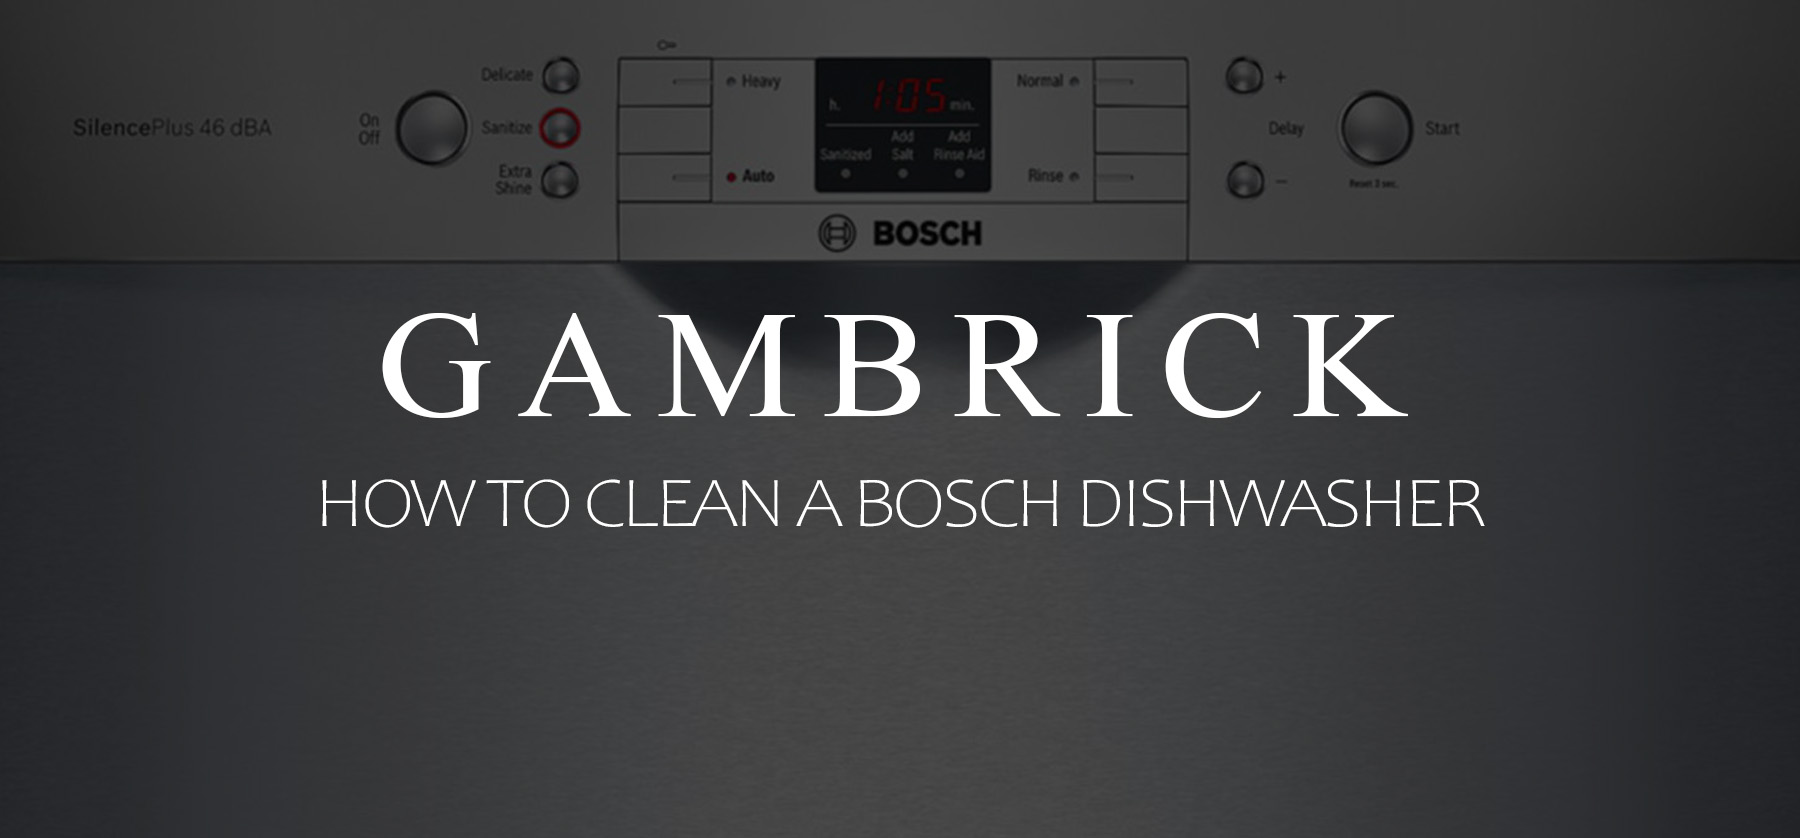 how to clean a bosch dishwasher banner 1.0